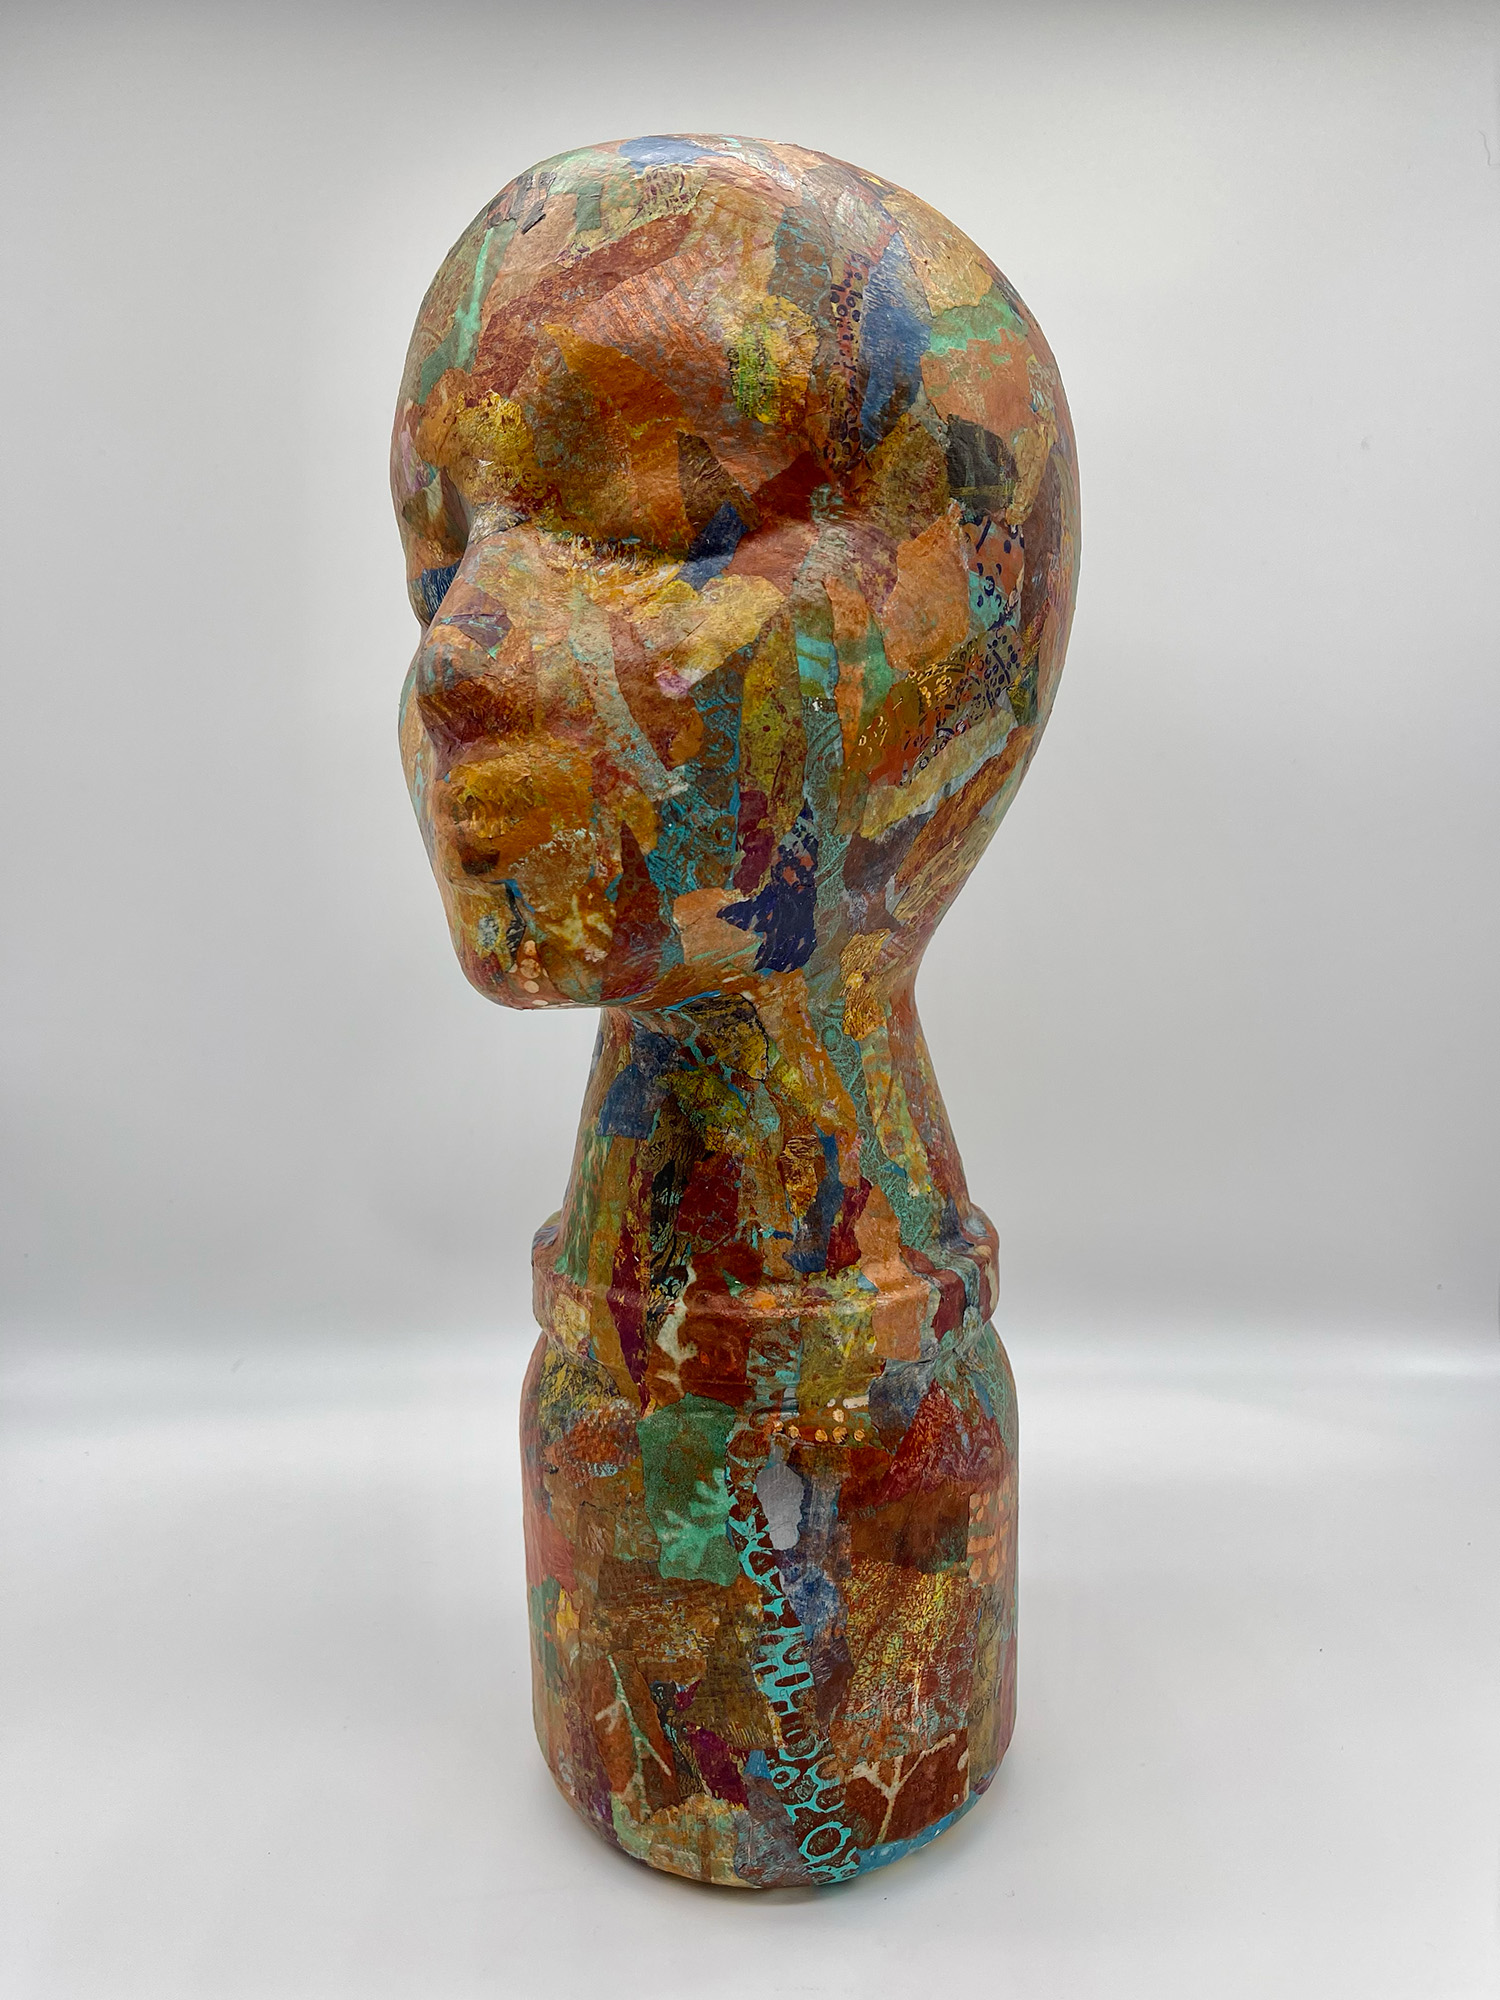 "Liv" by A.H. Lawver - a sculpture of a head, painted in wild & free splatterings of monoprints.